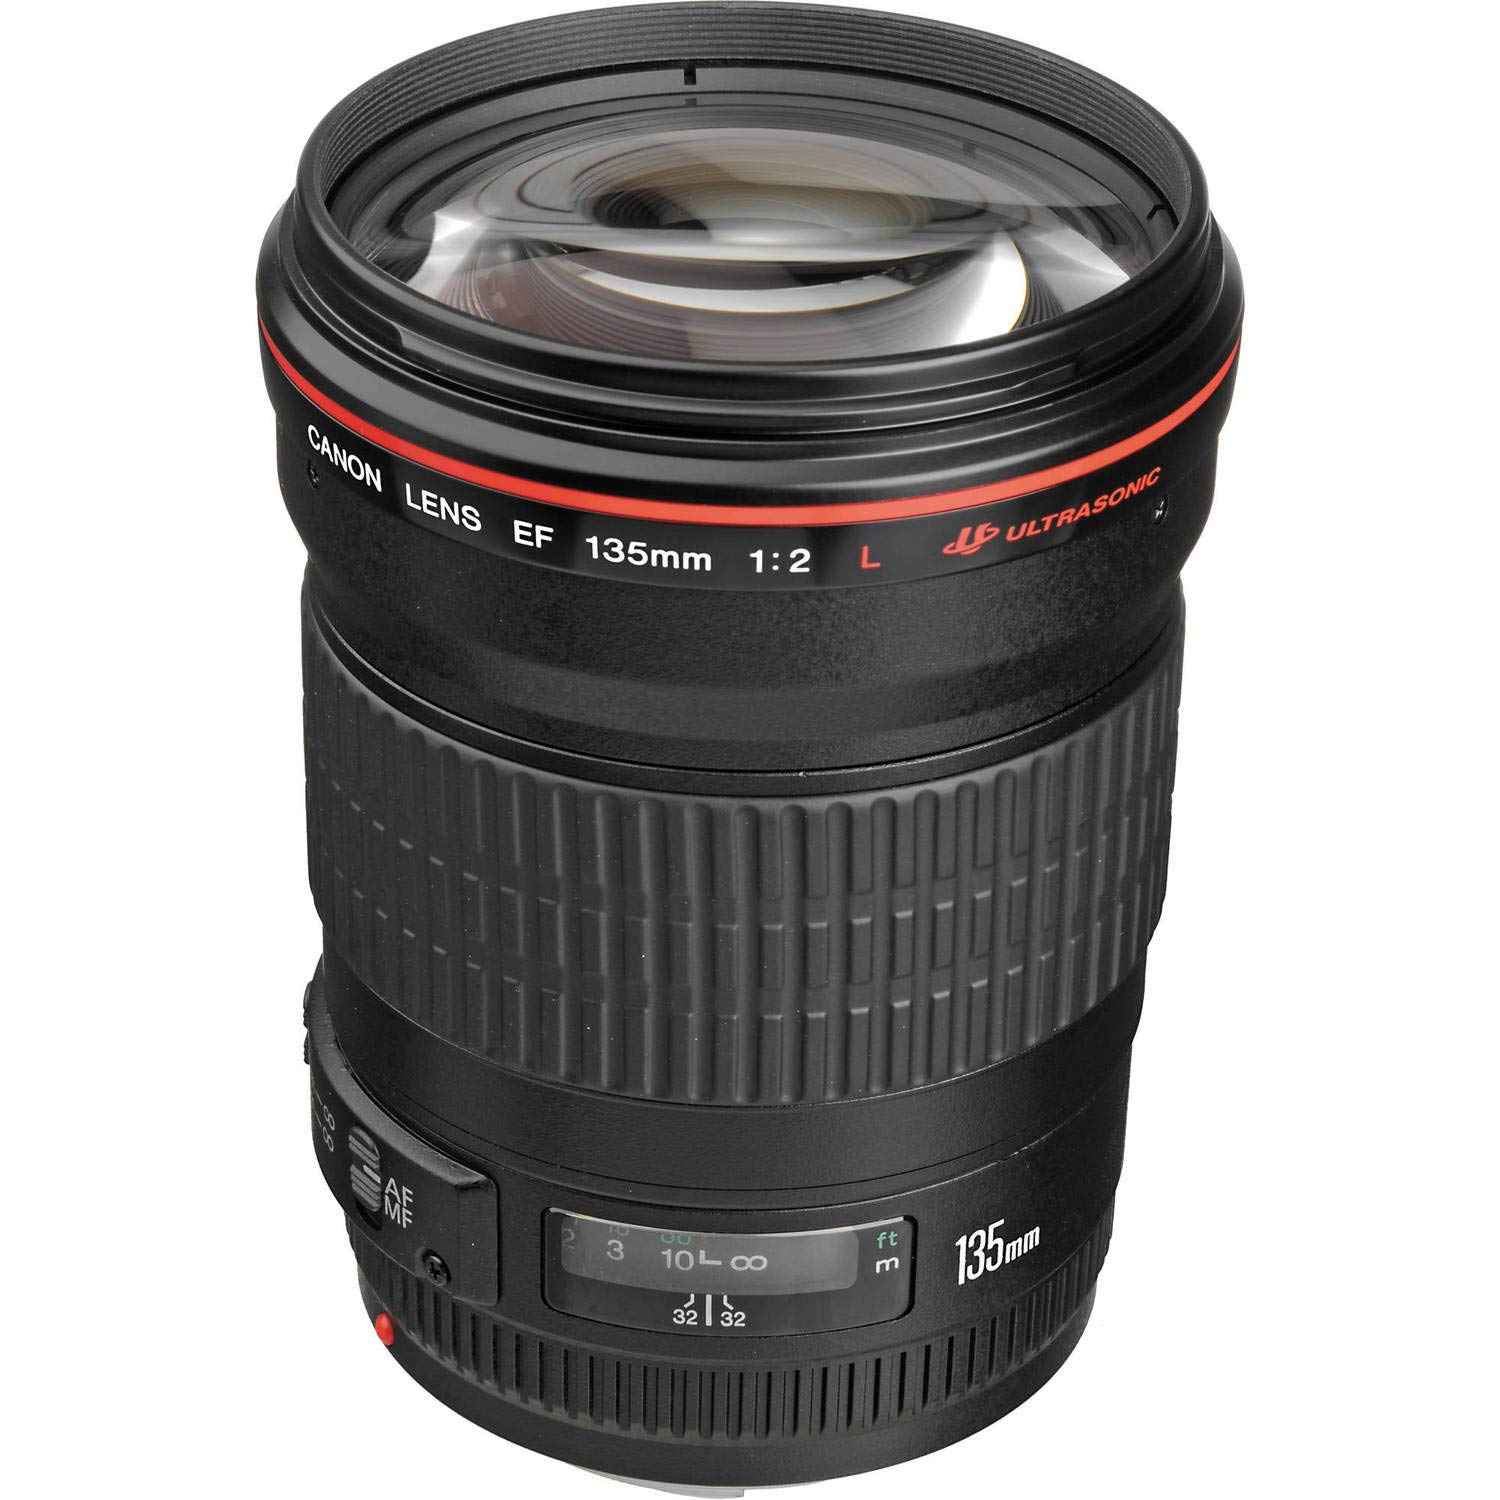 Canon EF 135mm f/2L USM Lens (Intl Model) with Filter Kit, Lens Case, Tripod, Cleaning Kit and Extended Warranty